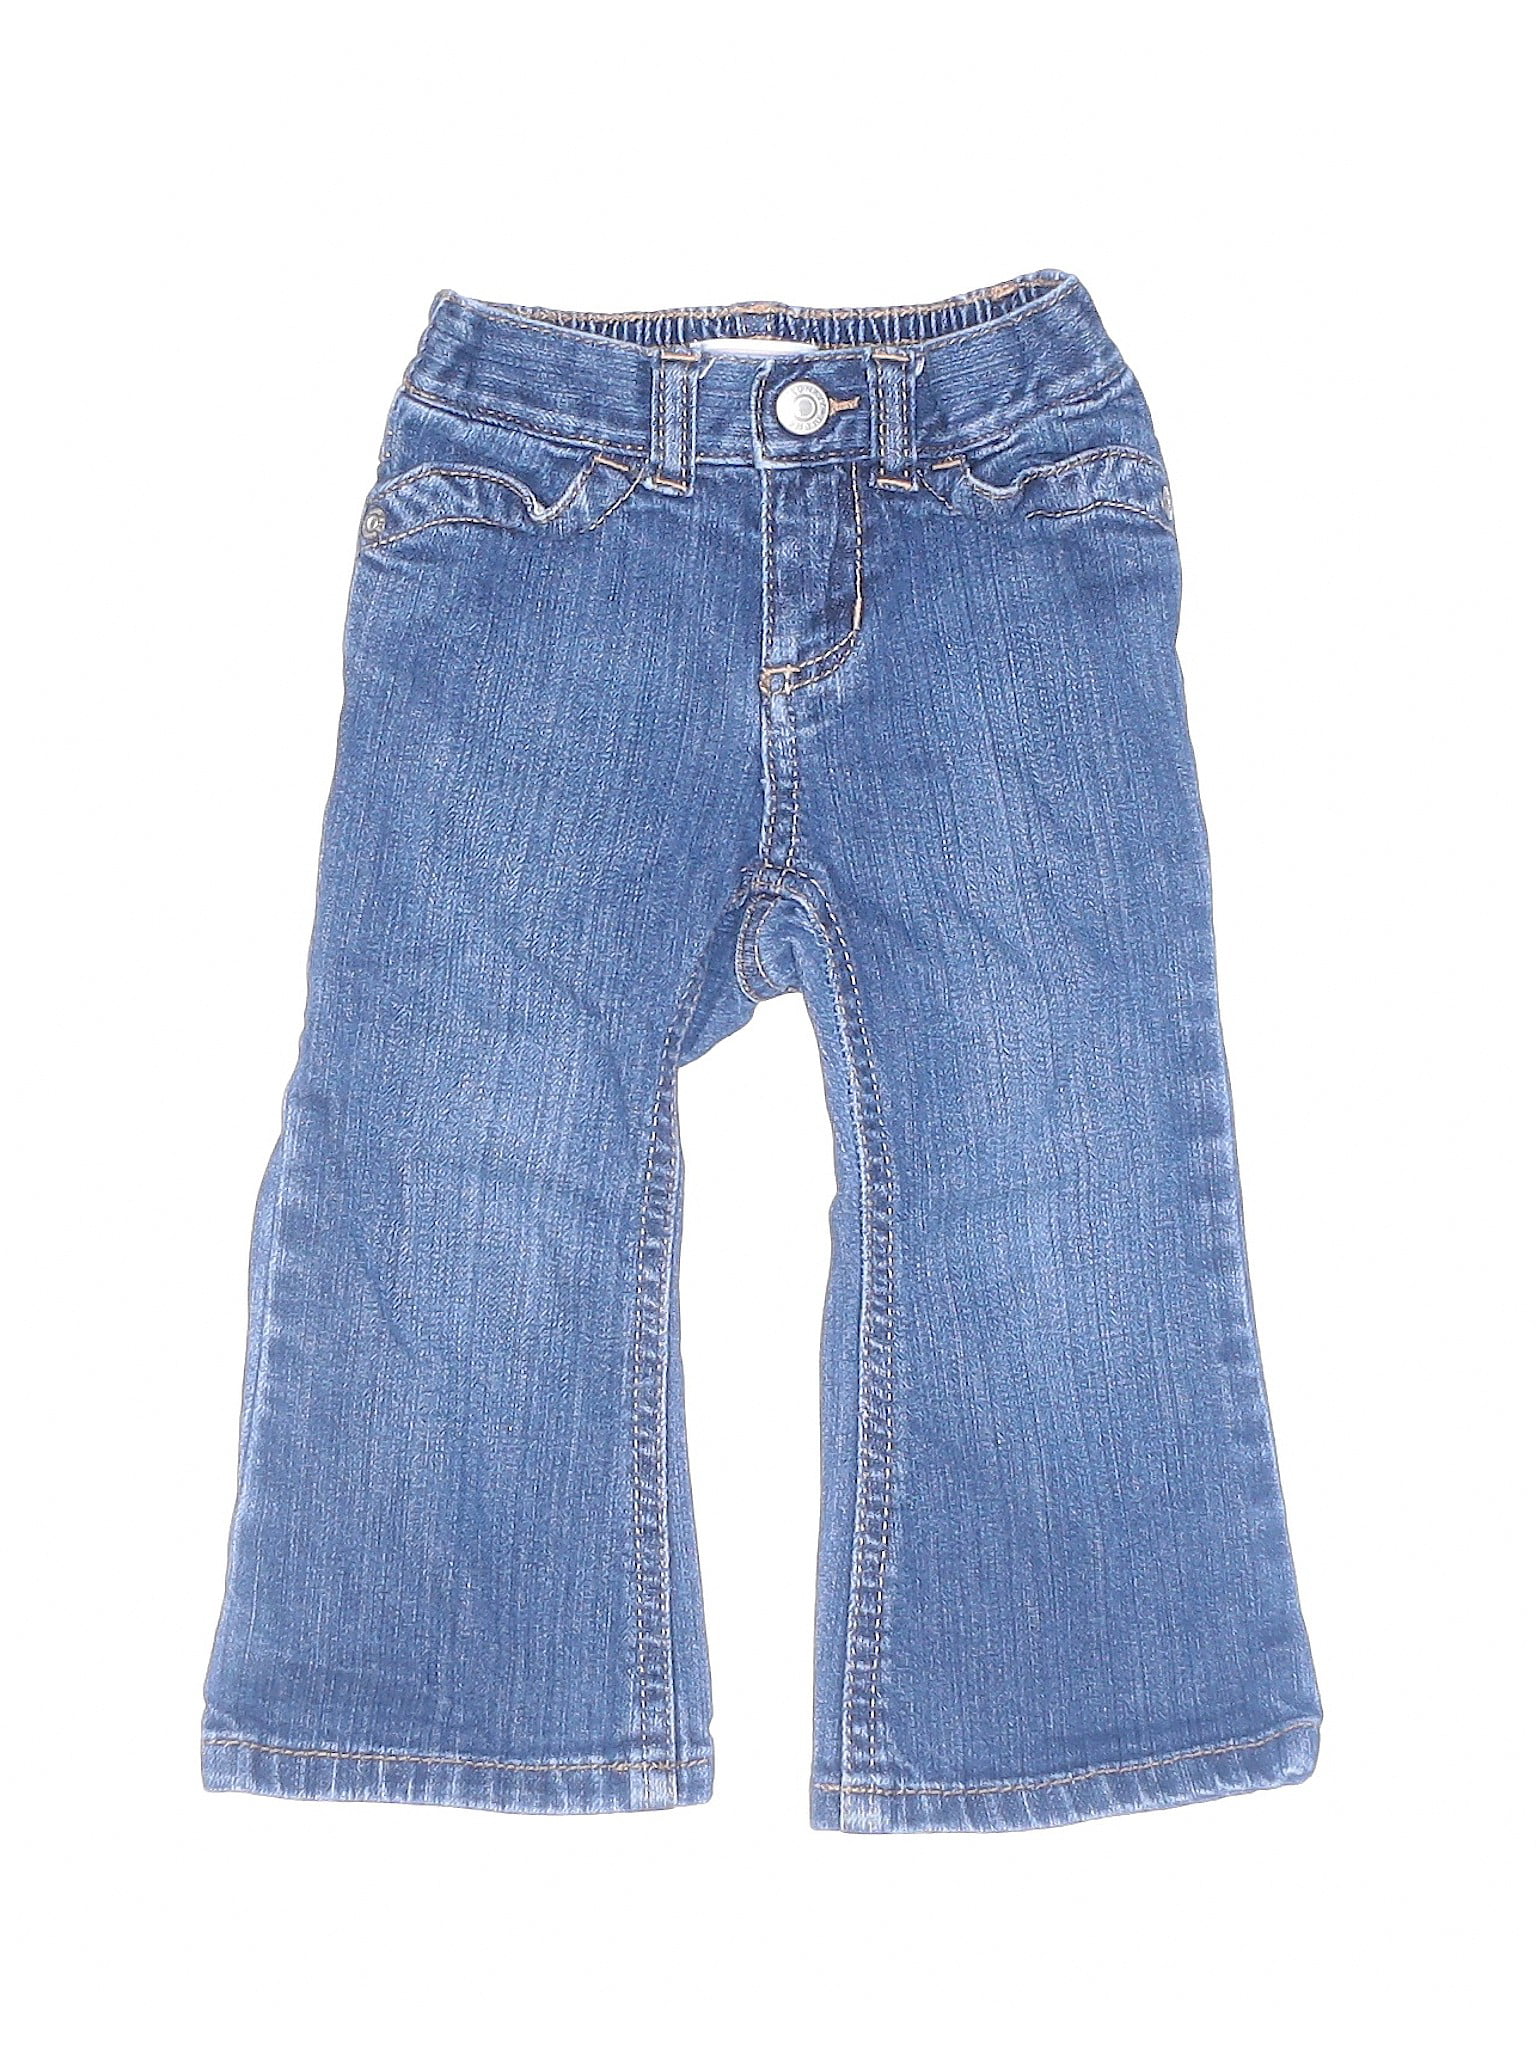 Old Navy - Pre-Owned Old Navy Girl's Size 18-24 Mo Jeans - Walmart.com ...